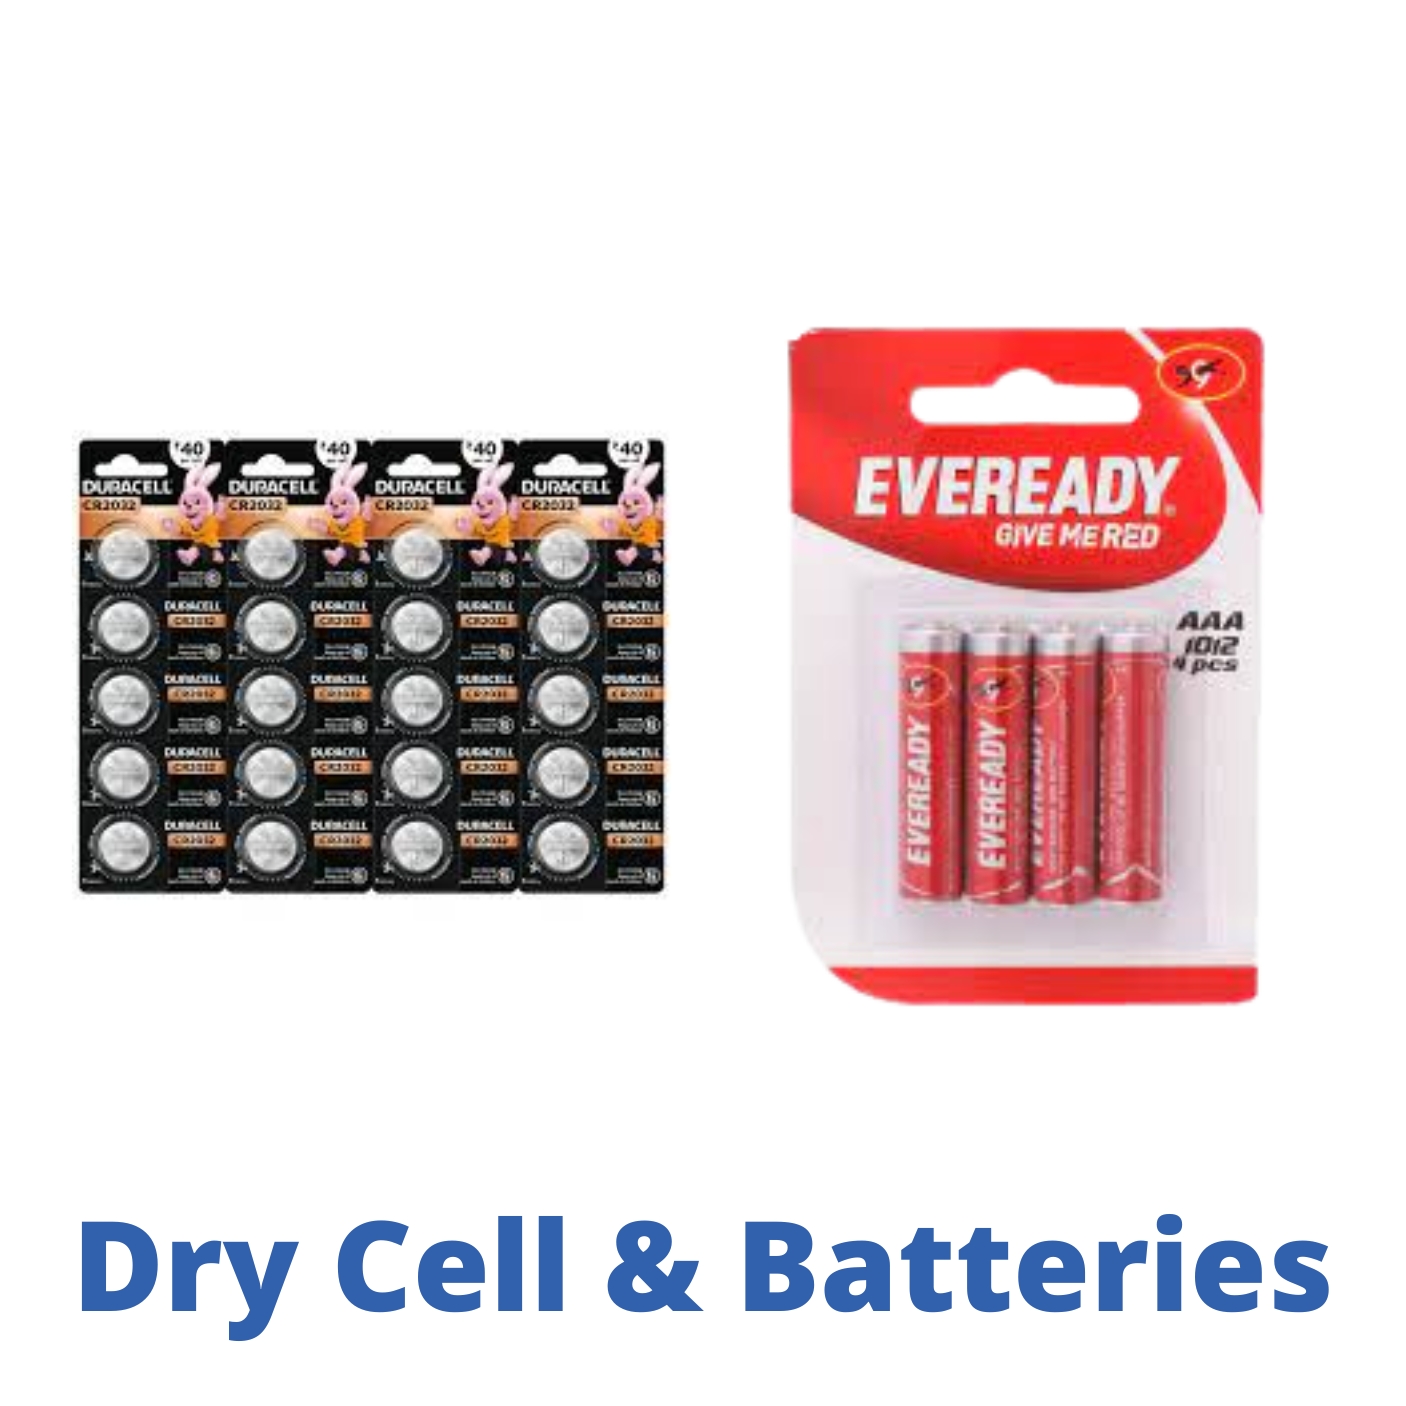 Dry Cell & Batteries